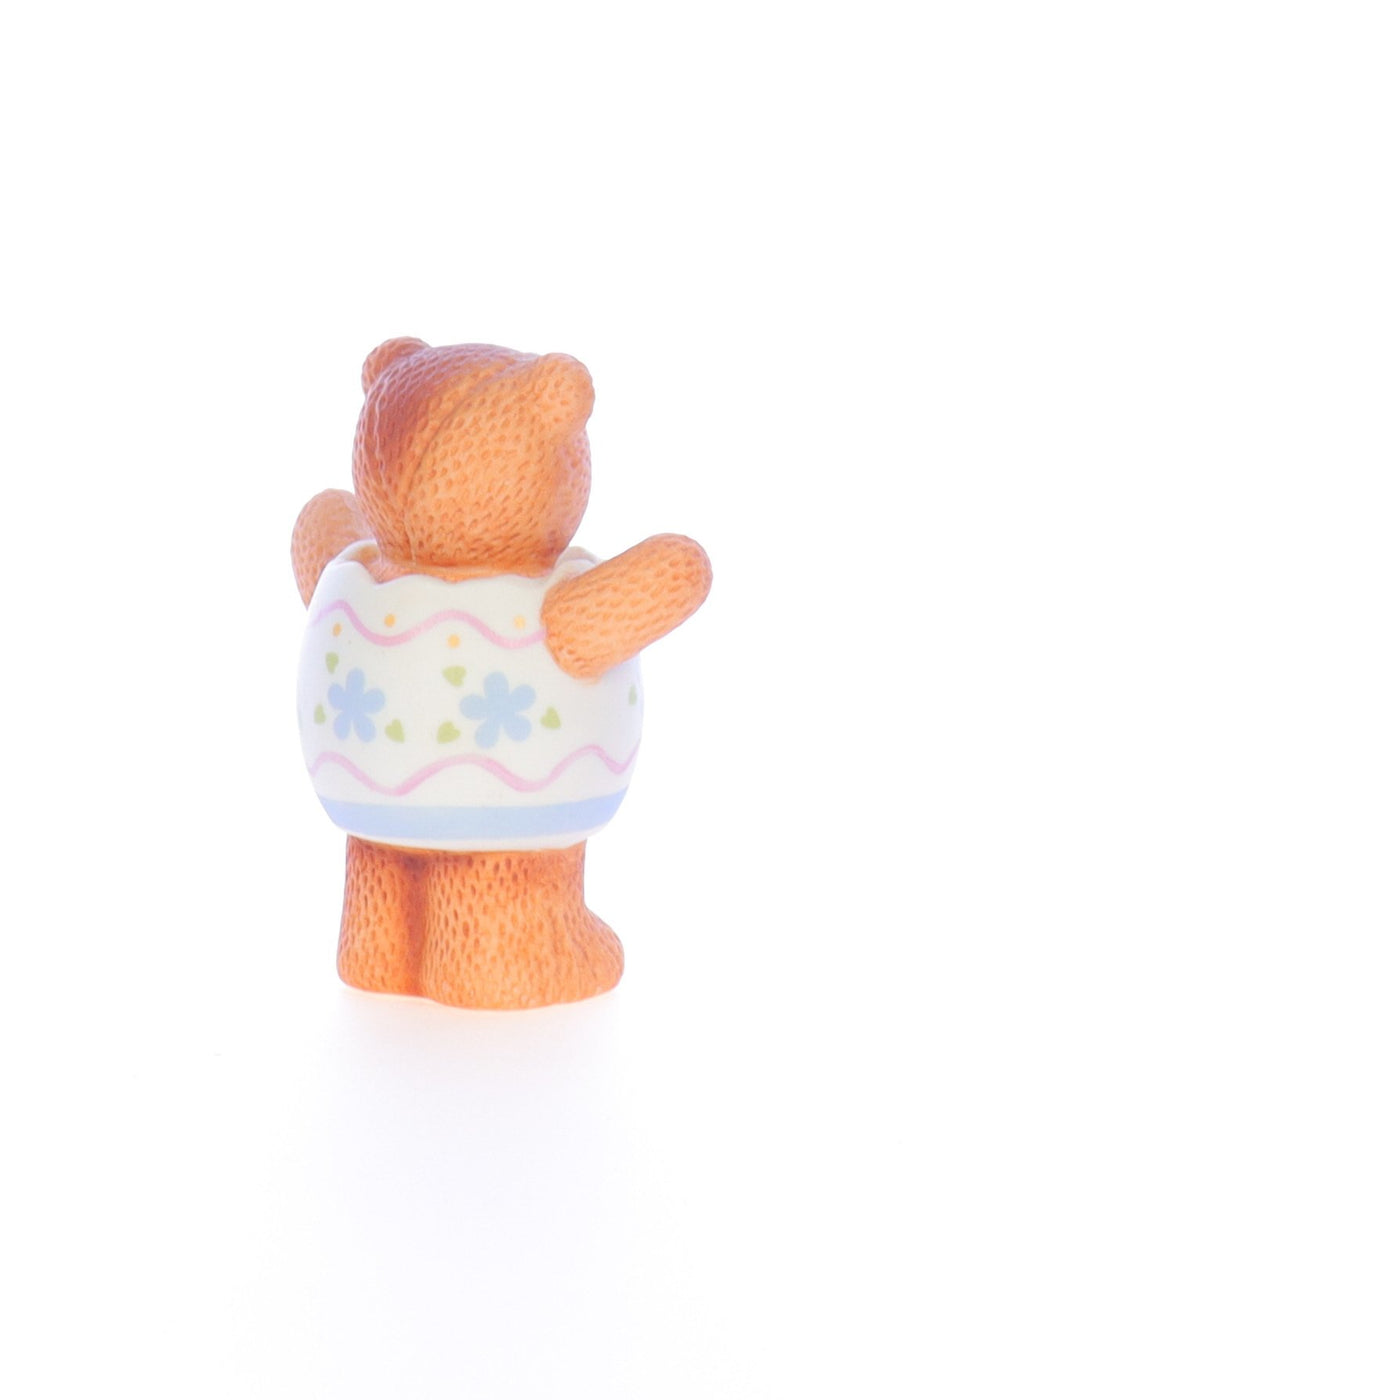 Lucy_And_Me_by_Lucy_Atwell_Porcelain_Figurine_Girl_Bear_with_Easter_Egg_Costume_Lucy_Unknown_062_06